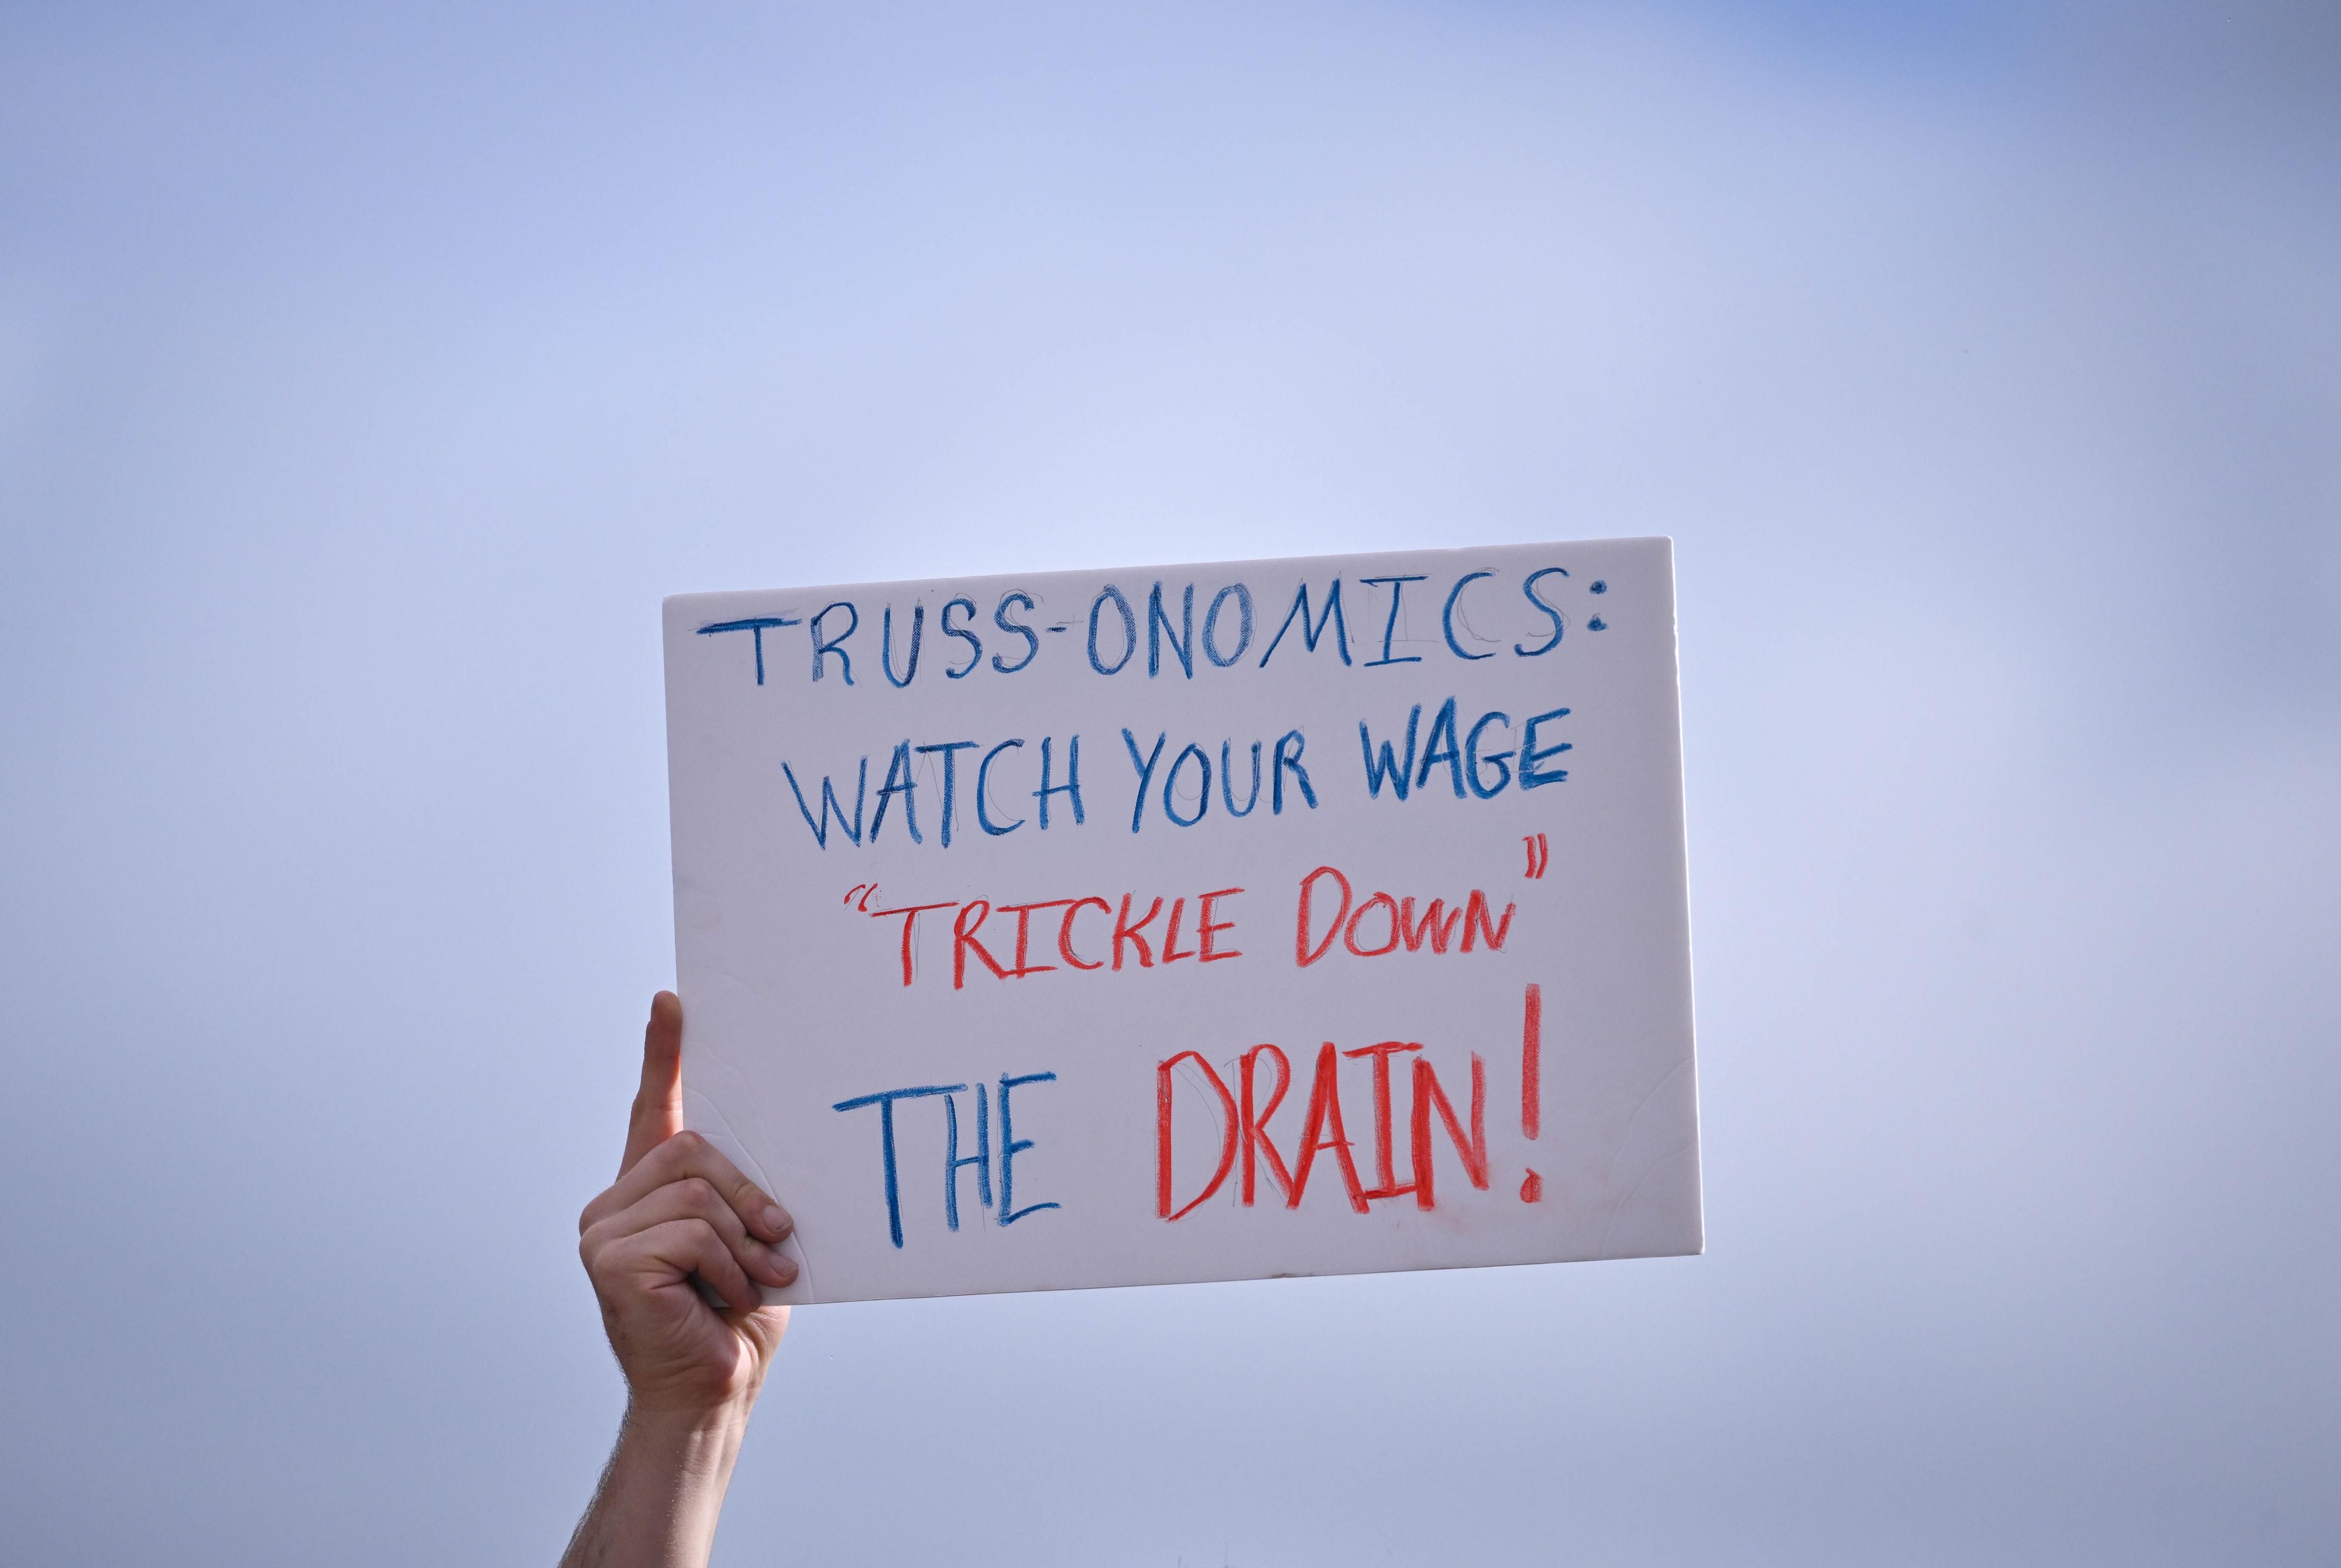 Signs reads "Truss-onomics: Watch your wage 'trickle down' the drain!"